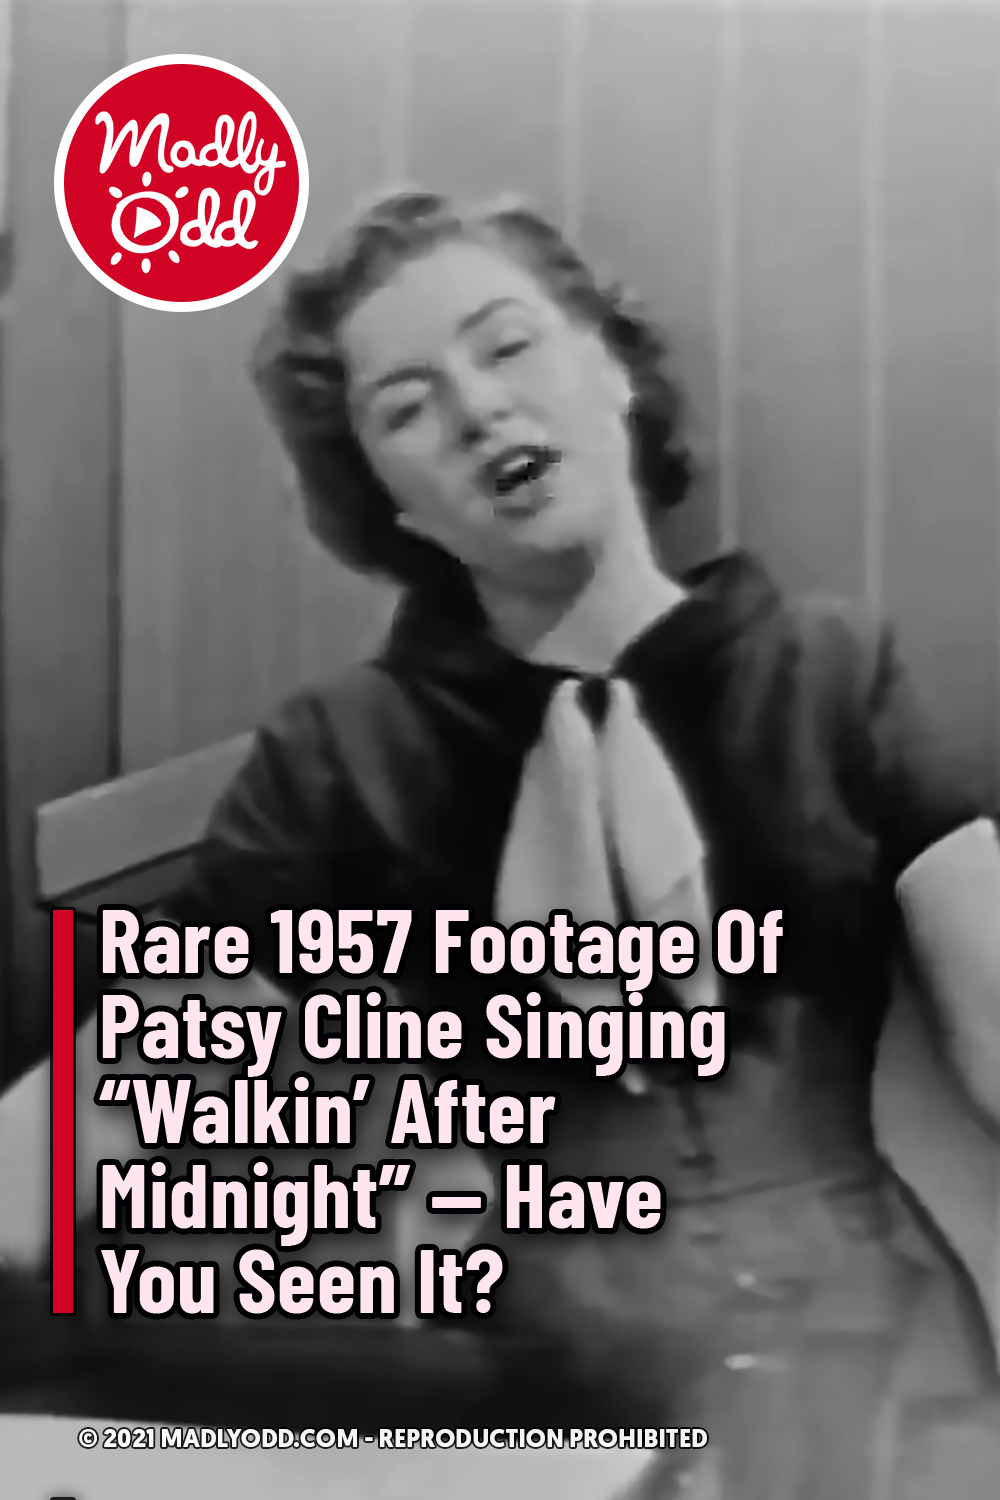 Rare 1957 Footage Of Patsy Cline Singing “Walkin’ After Midnight” — Have You Seen It?